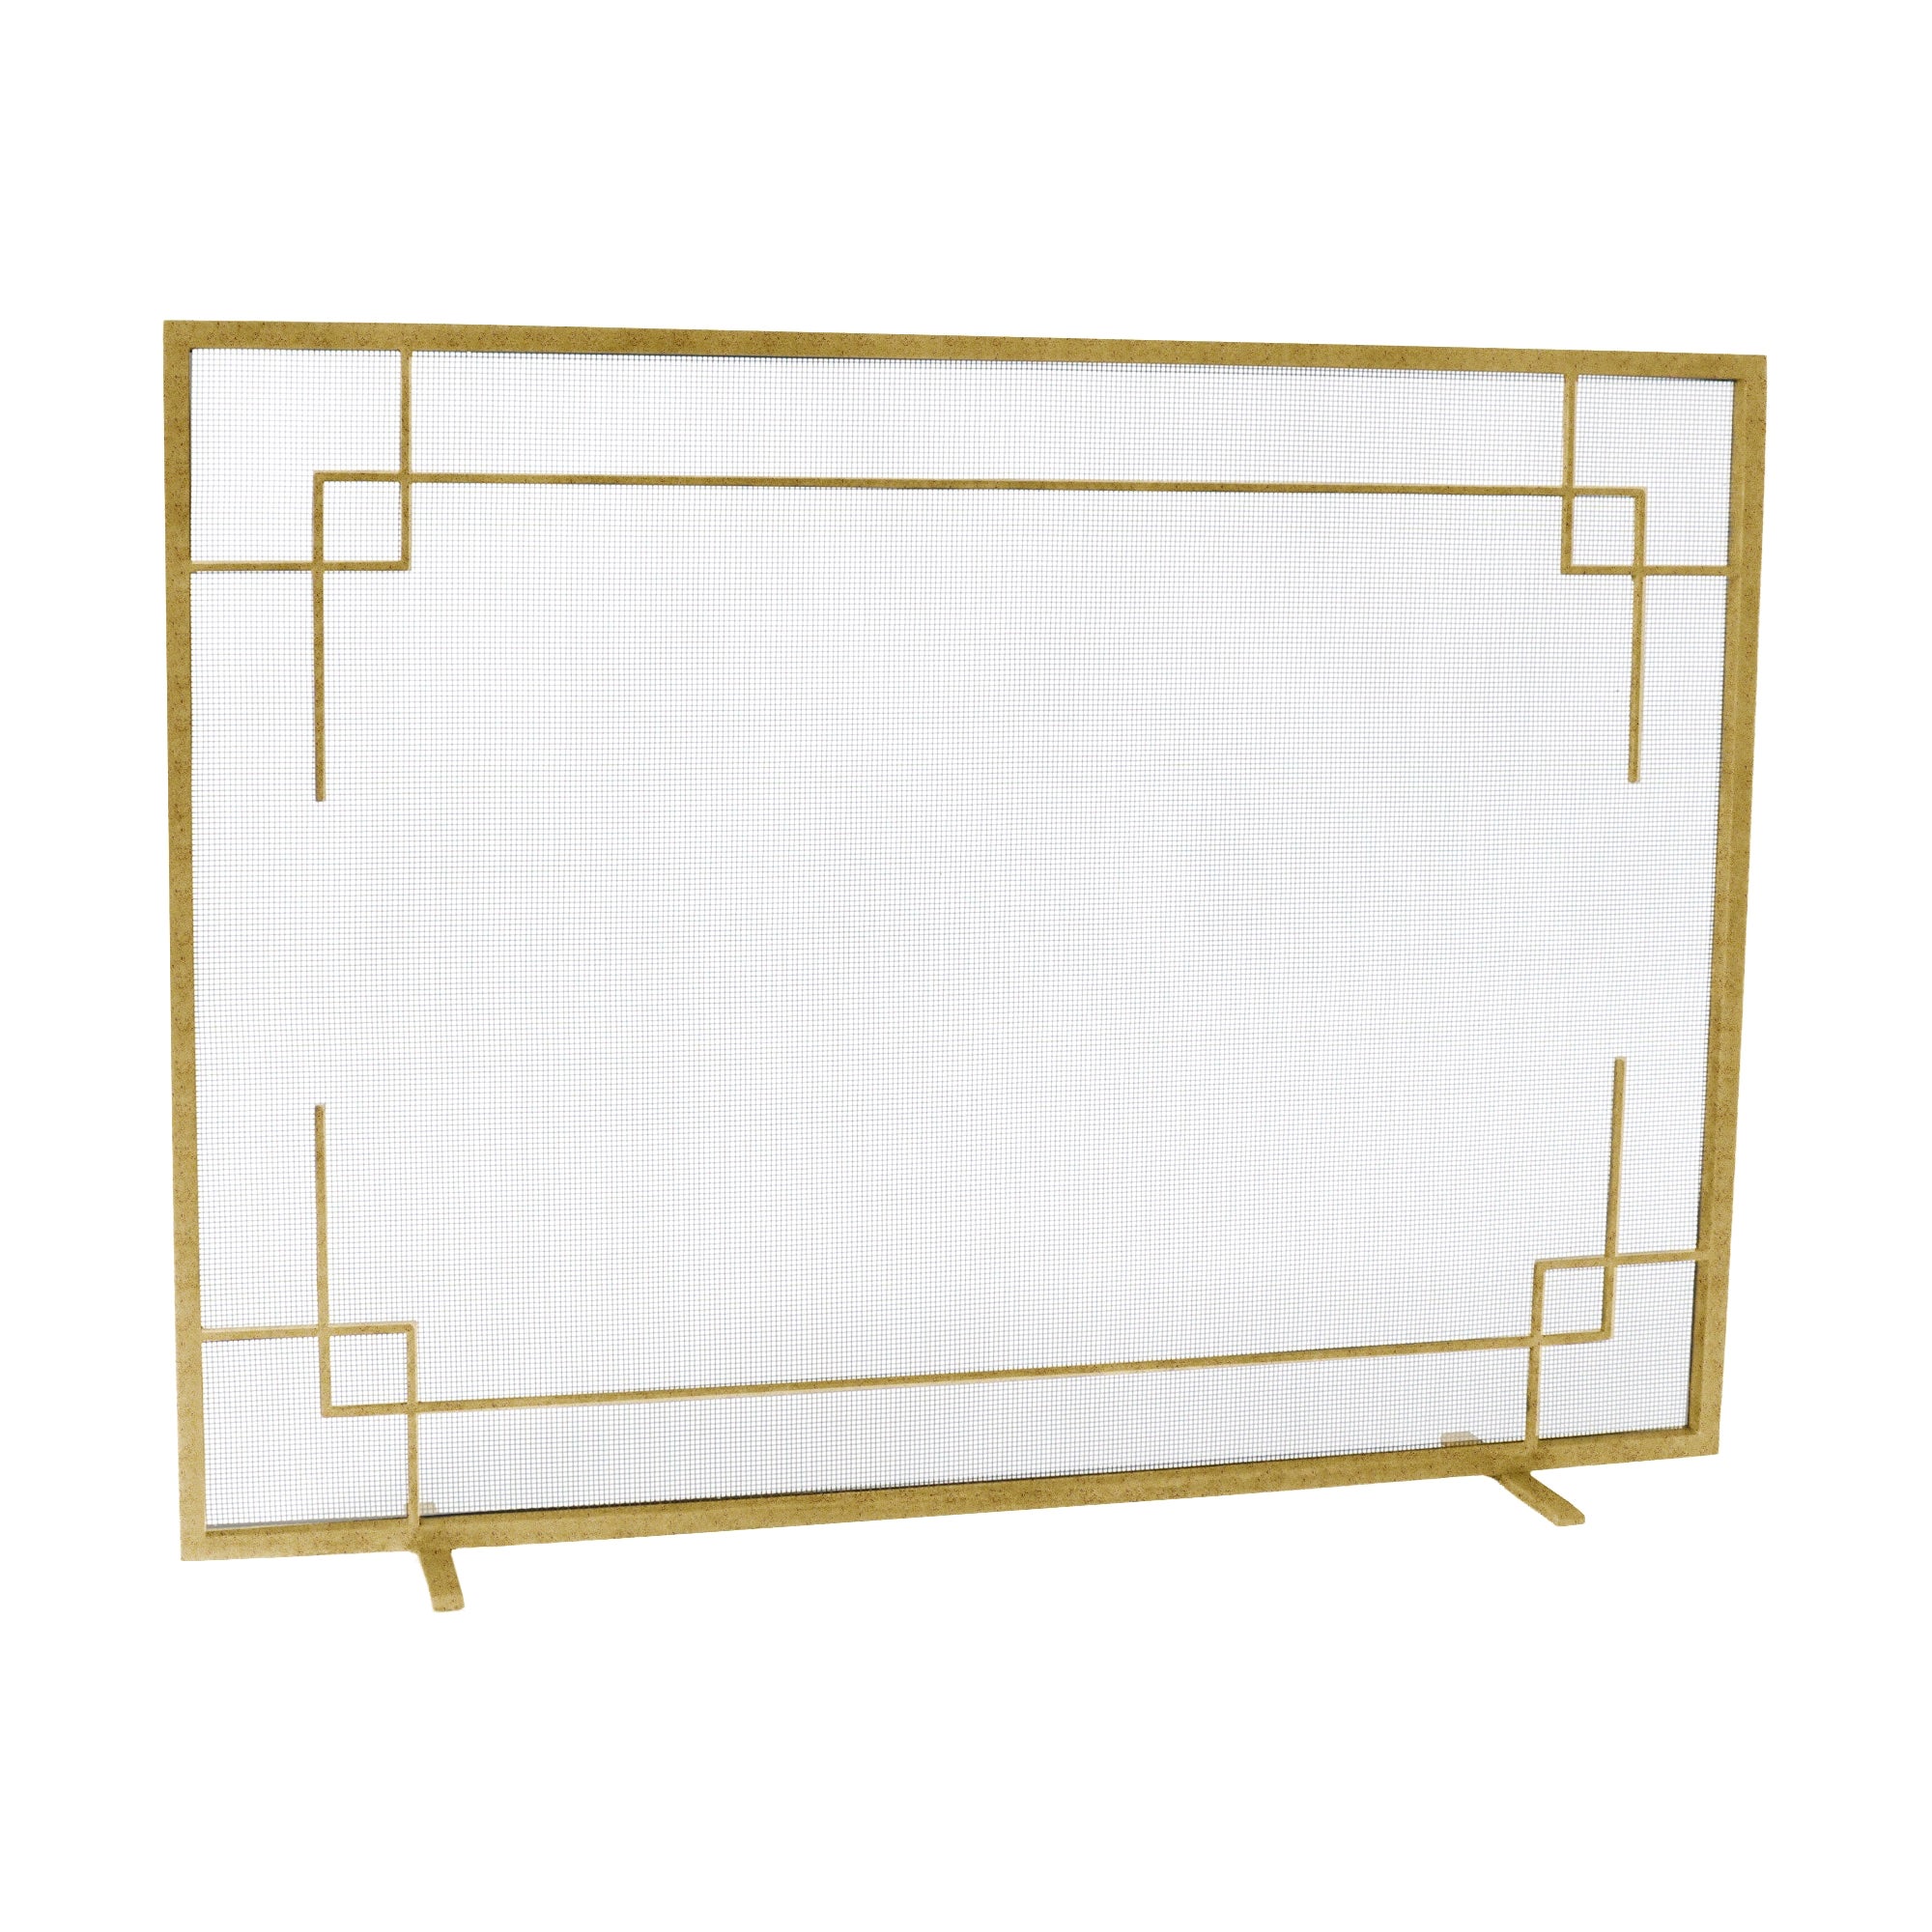 Evelynne Fireplace Screen in Brilliant Gold